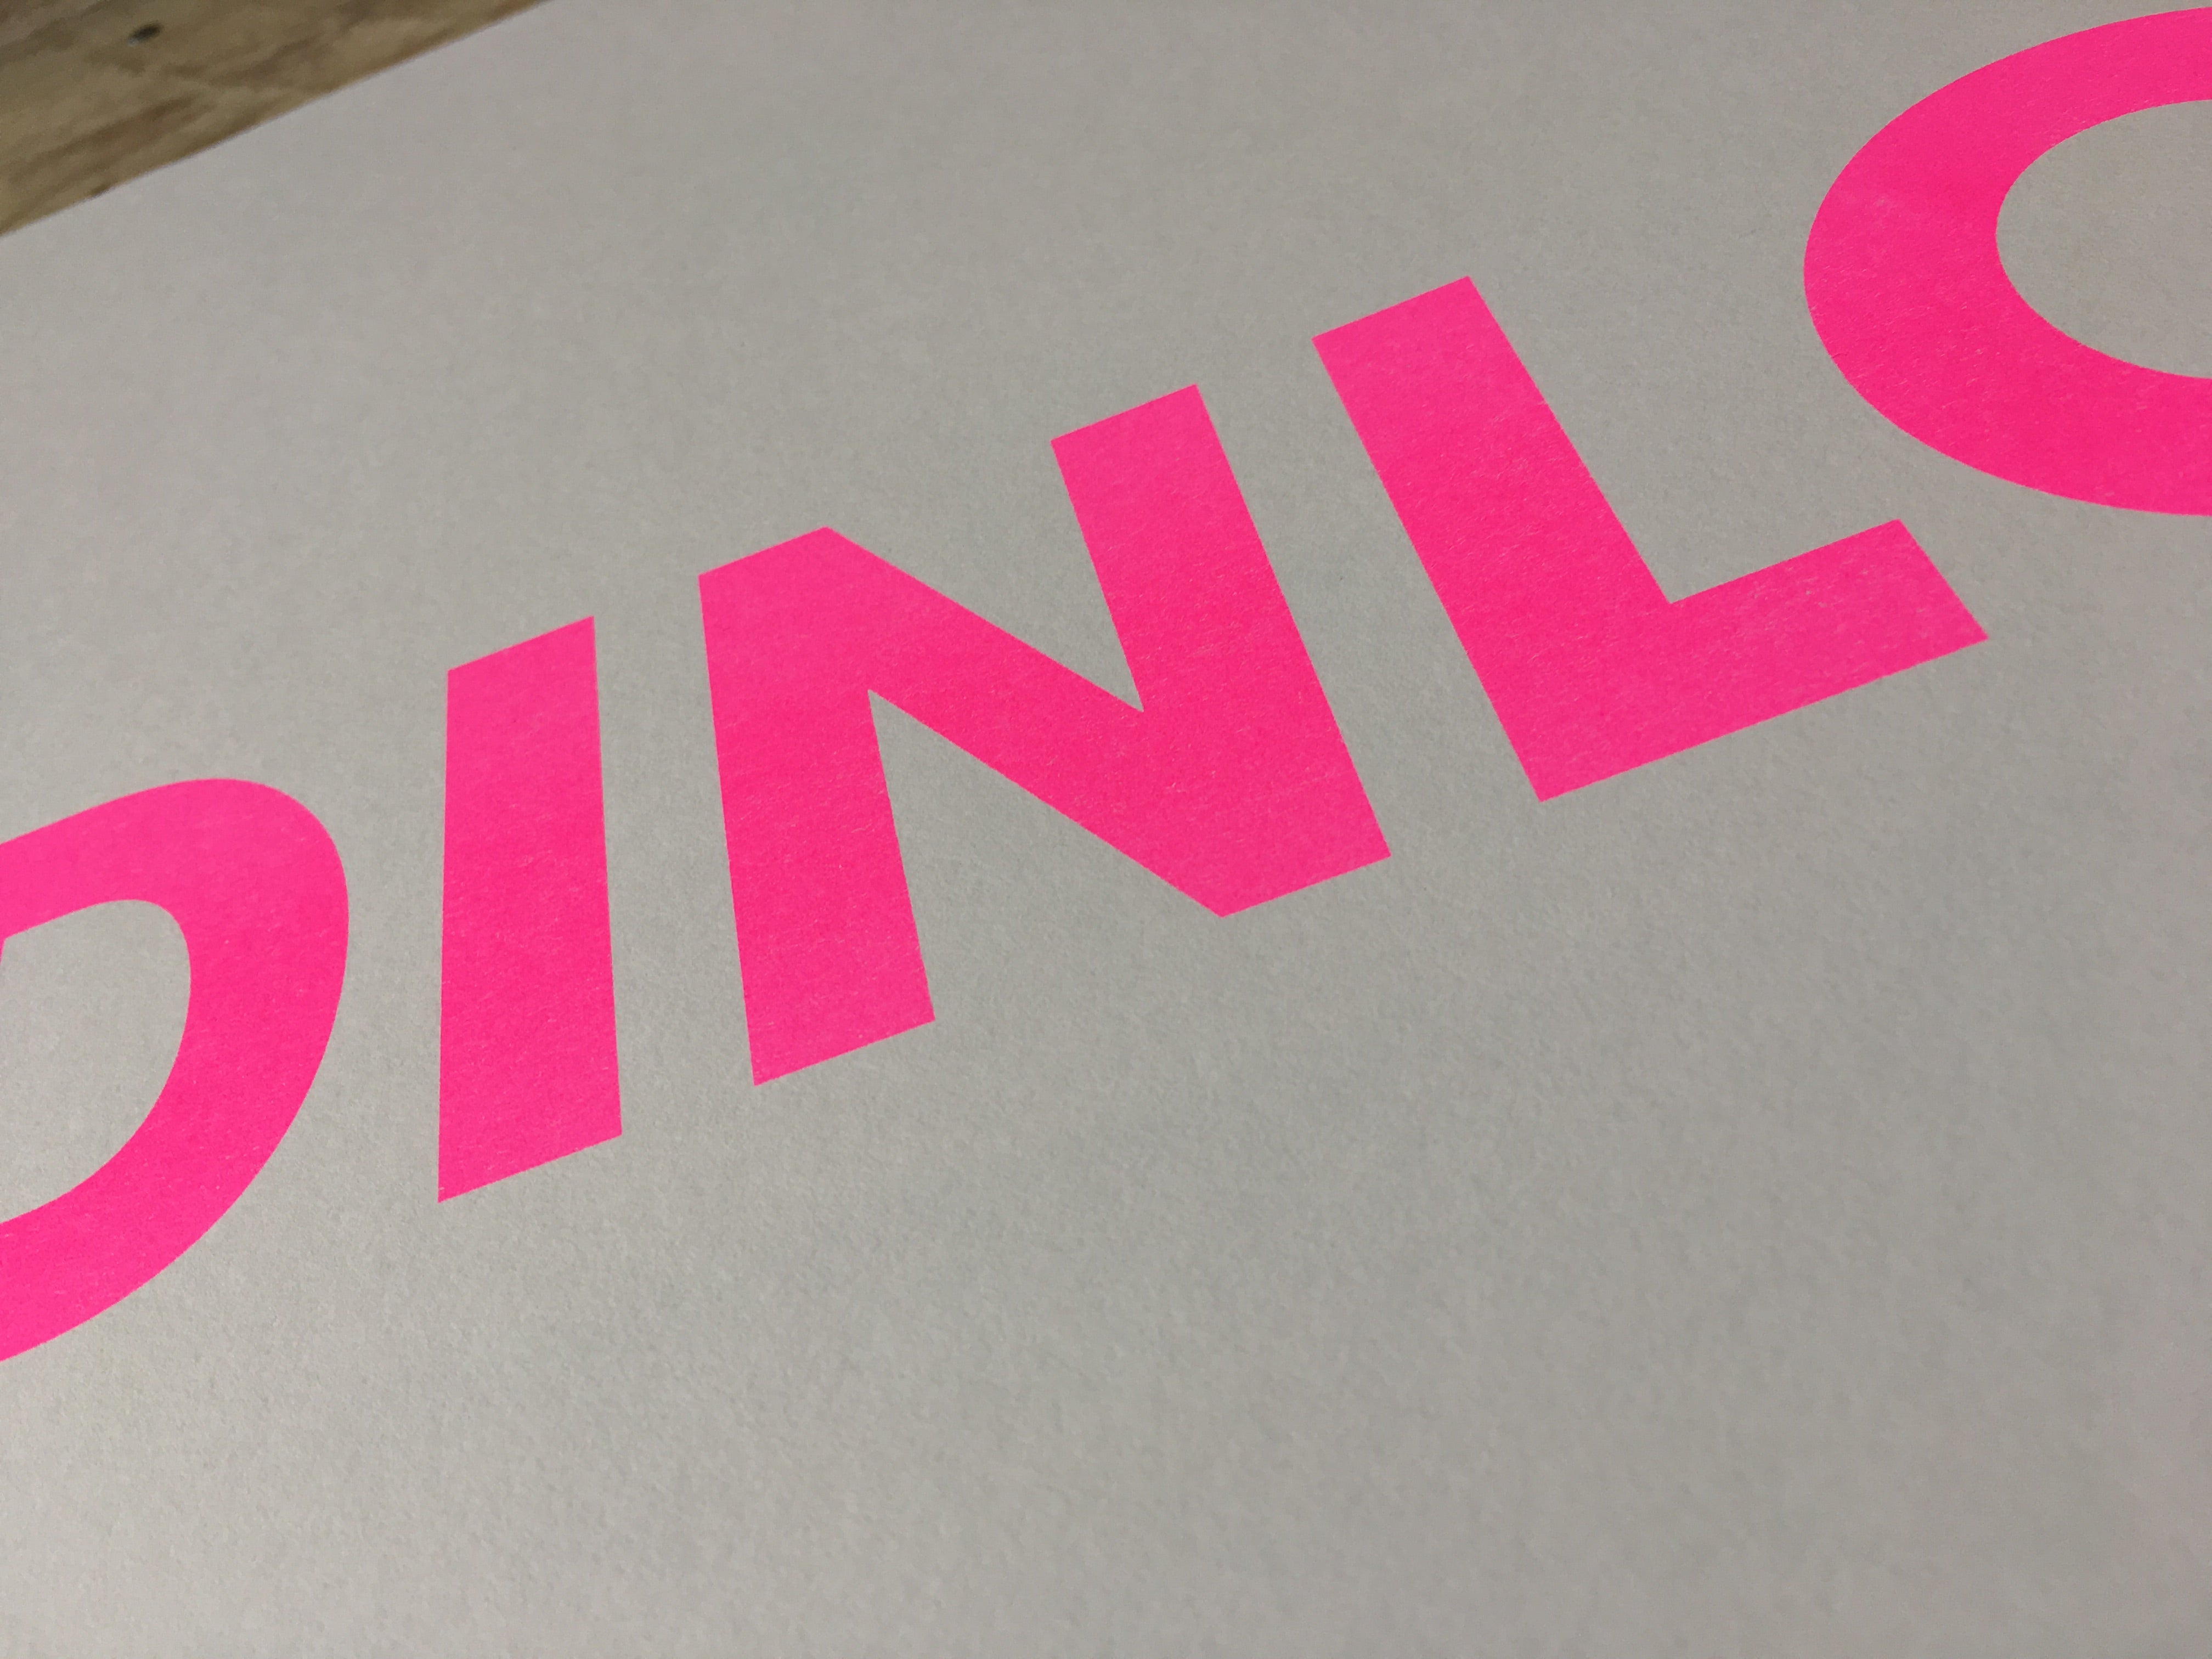 A3 DINLO RISO PRINT - POMPEY TYPE SERIES - foursandeights